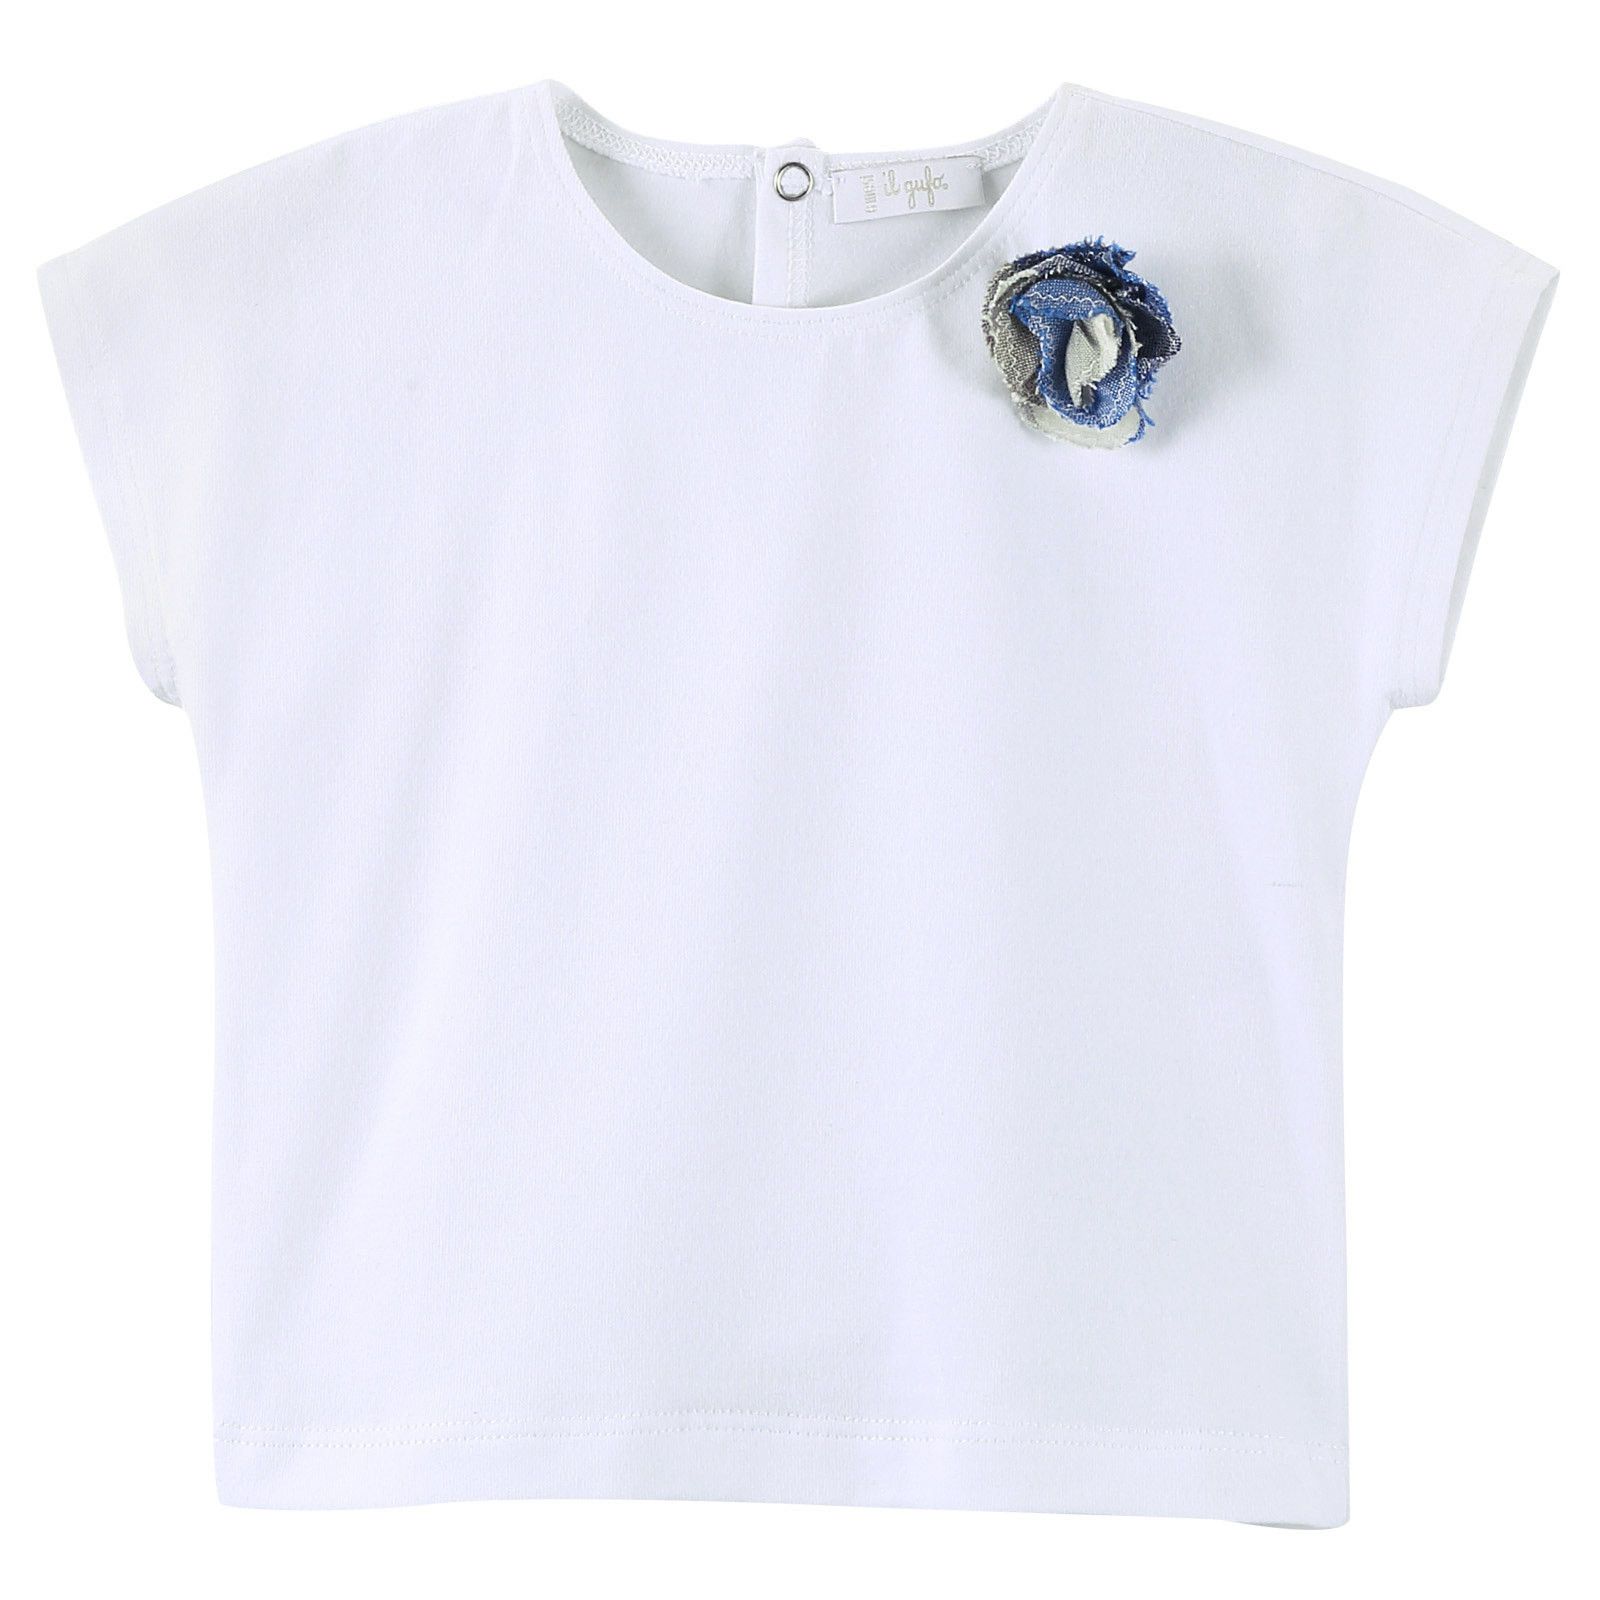 Baby Girls White T-Shirt With Blue Flower Patch Trims - CÉMAROSE | Children's Fashion Store - 1